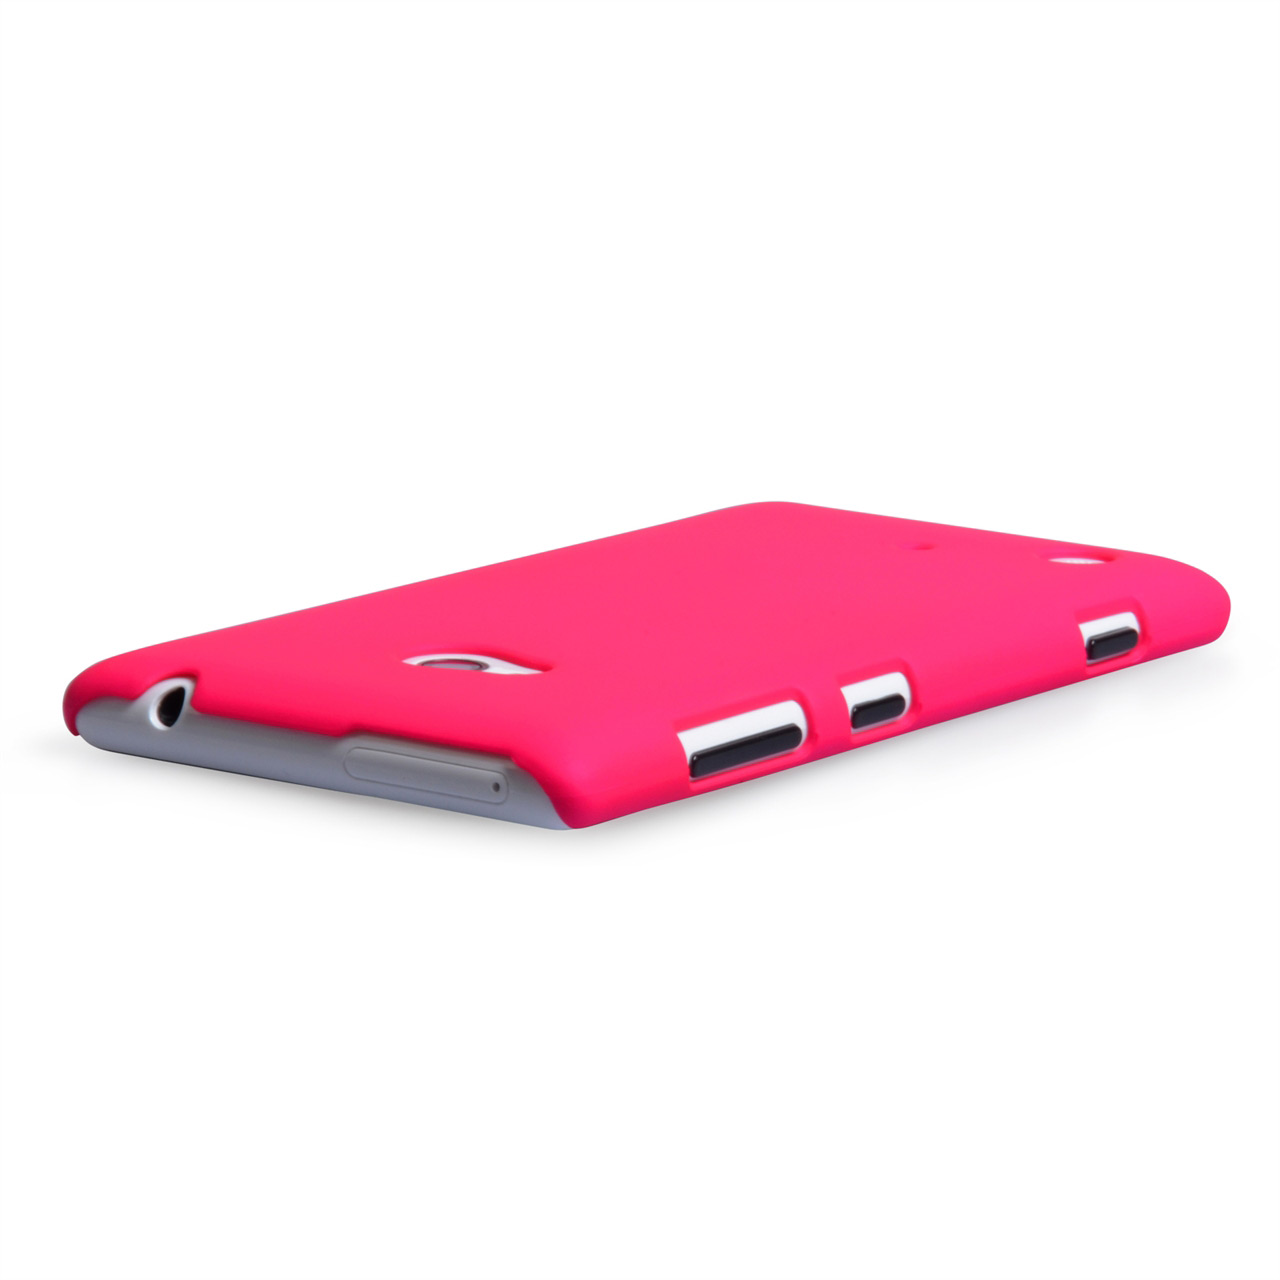 YouSave Accessories Nokia Lumia 720 Hard Hybrid Case - Hot Pink